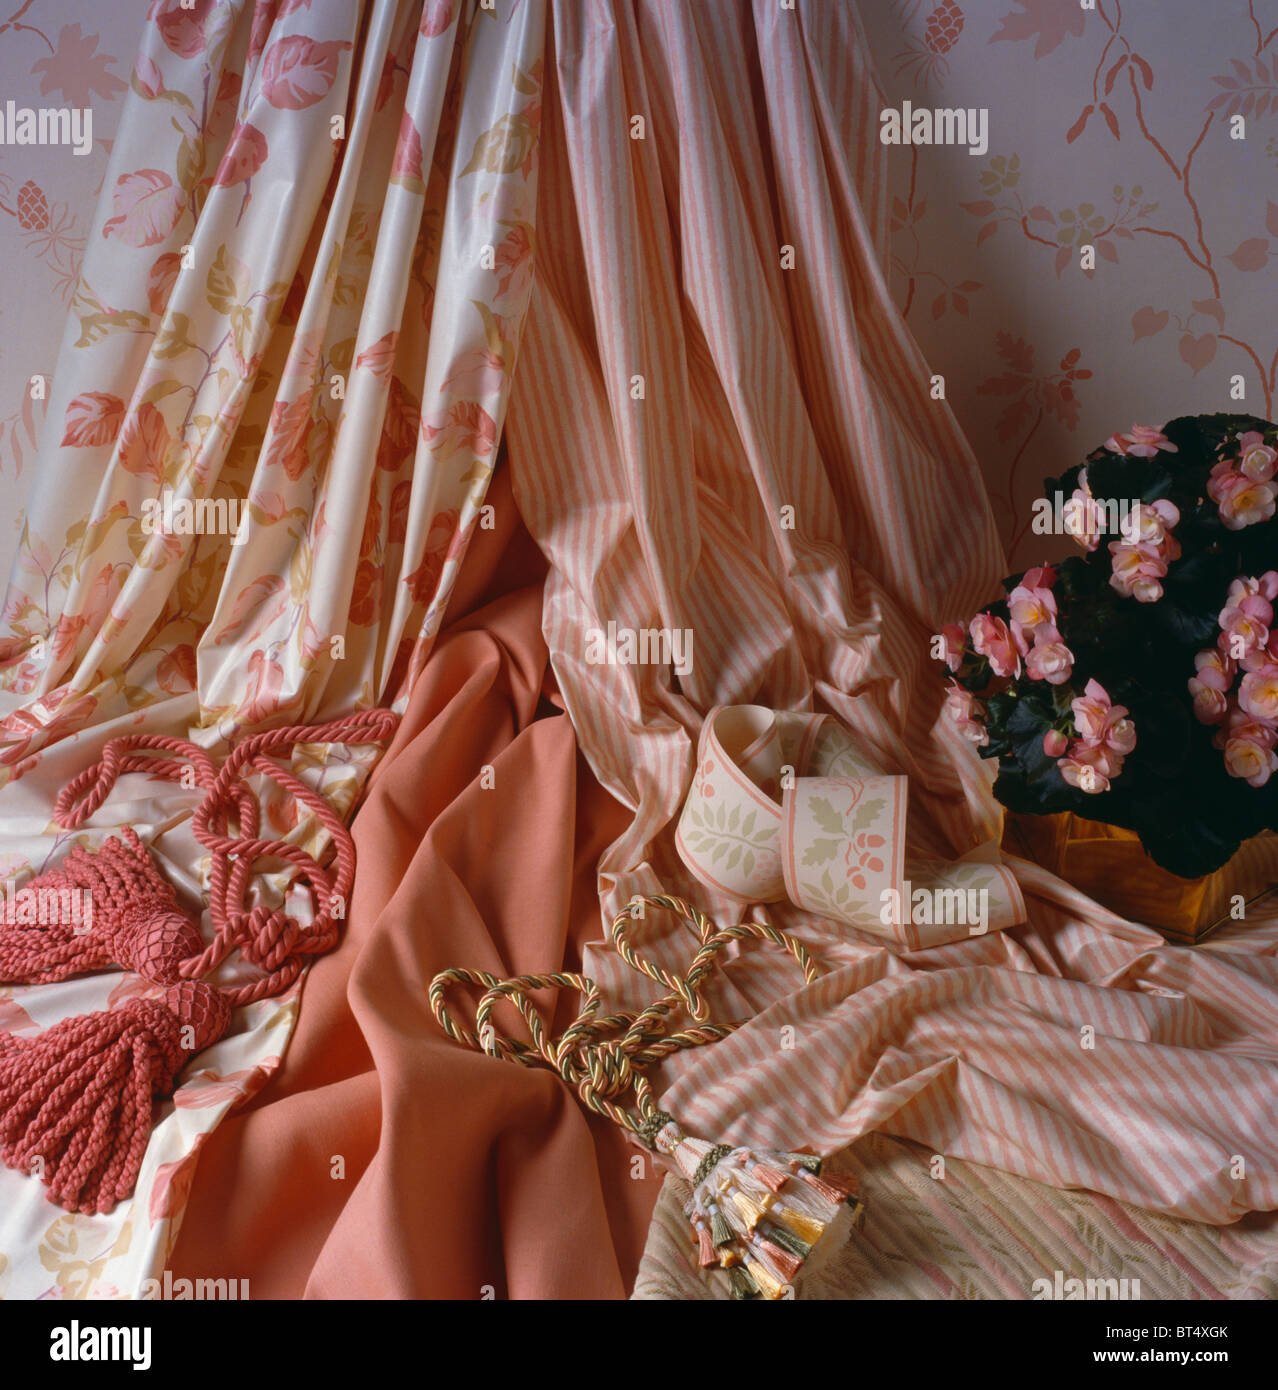 Close-up of pink glazed cotton floral and striped fabric and trimmings Stock Photo